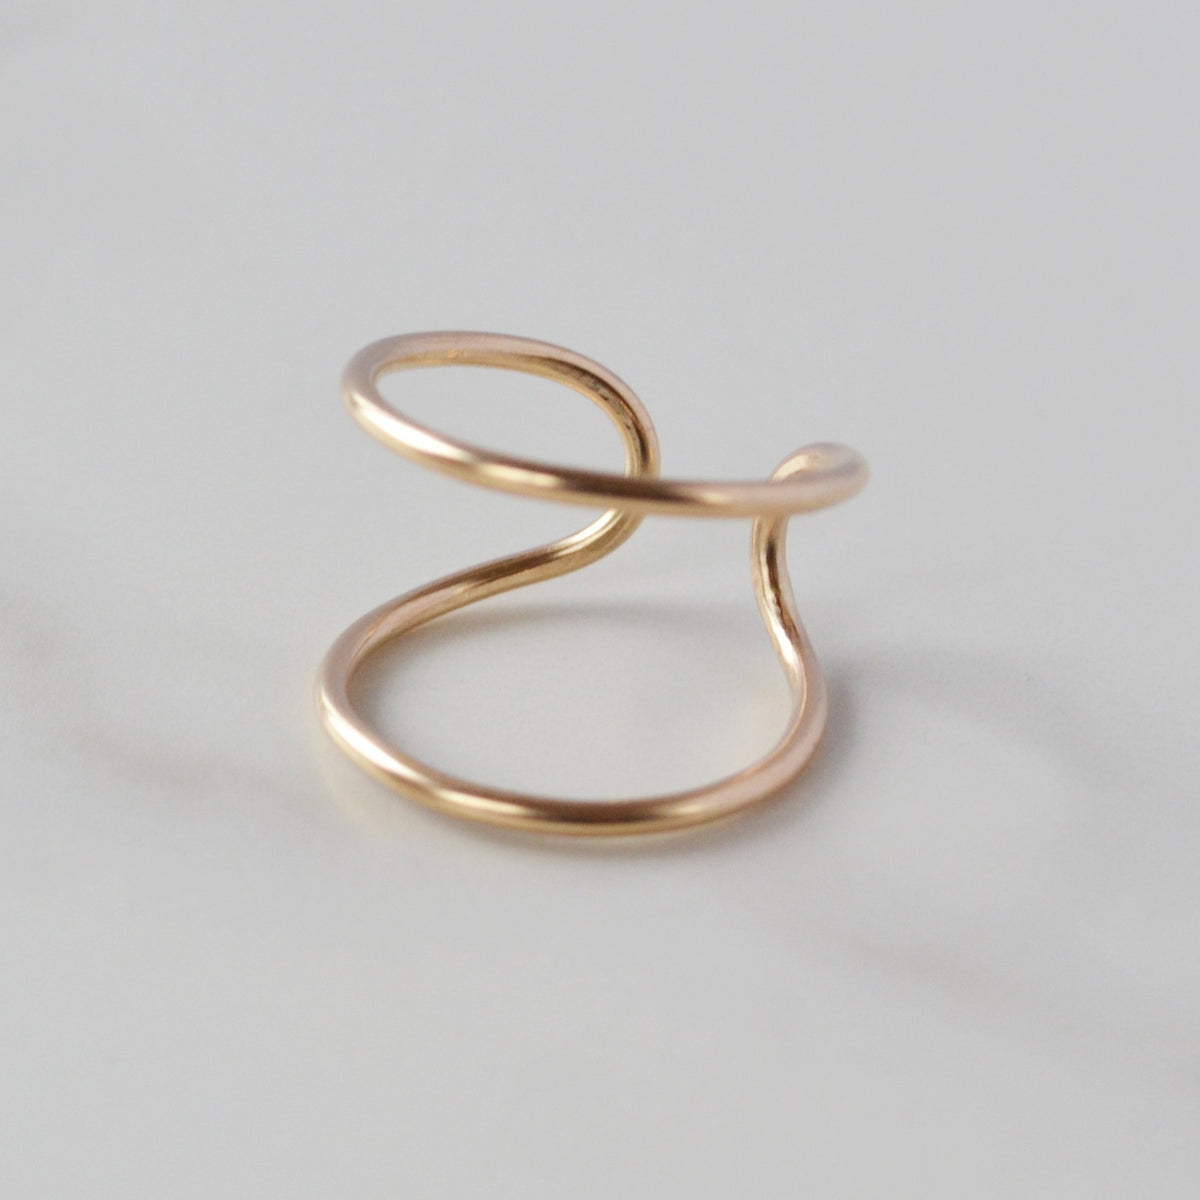 Double Knuckle Ring, Gold, Rose Gold, or Sterling Silver